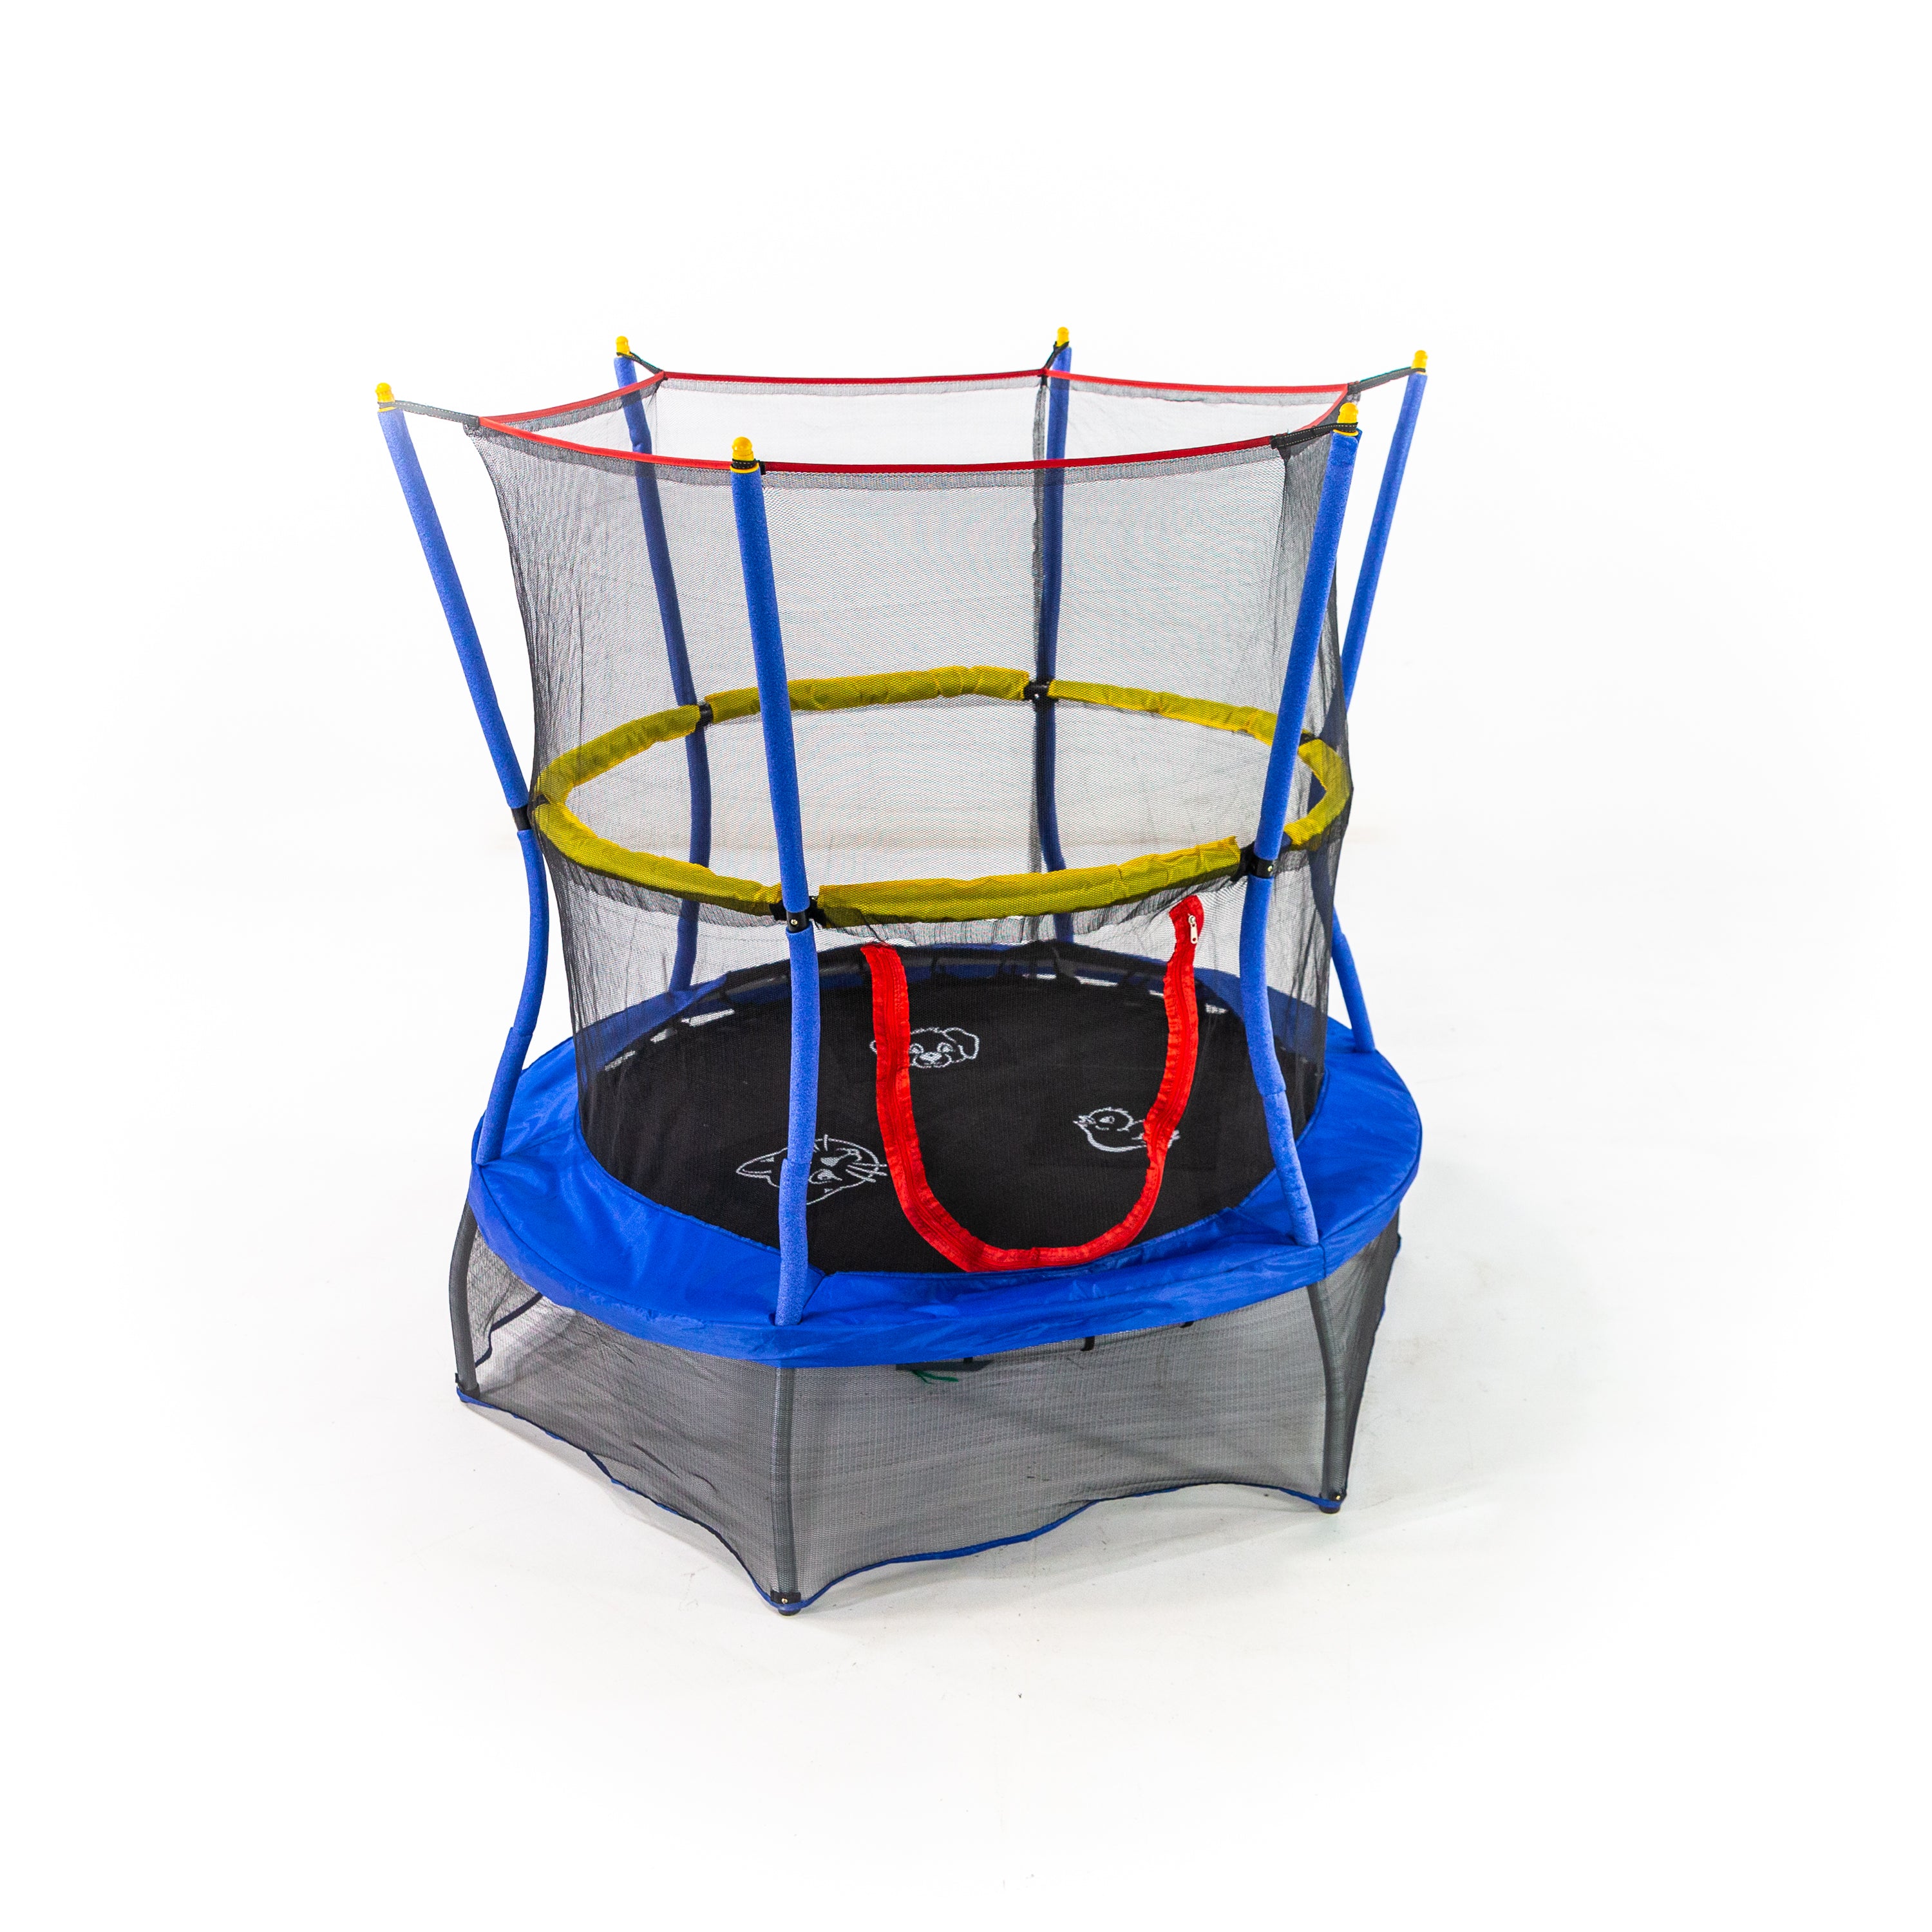 55" Round Bounce-N-Learn Interactive Mini Trampoline with Enclosure and Sound